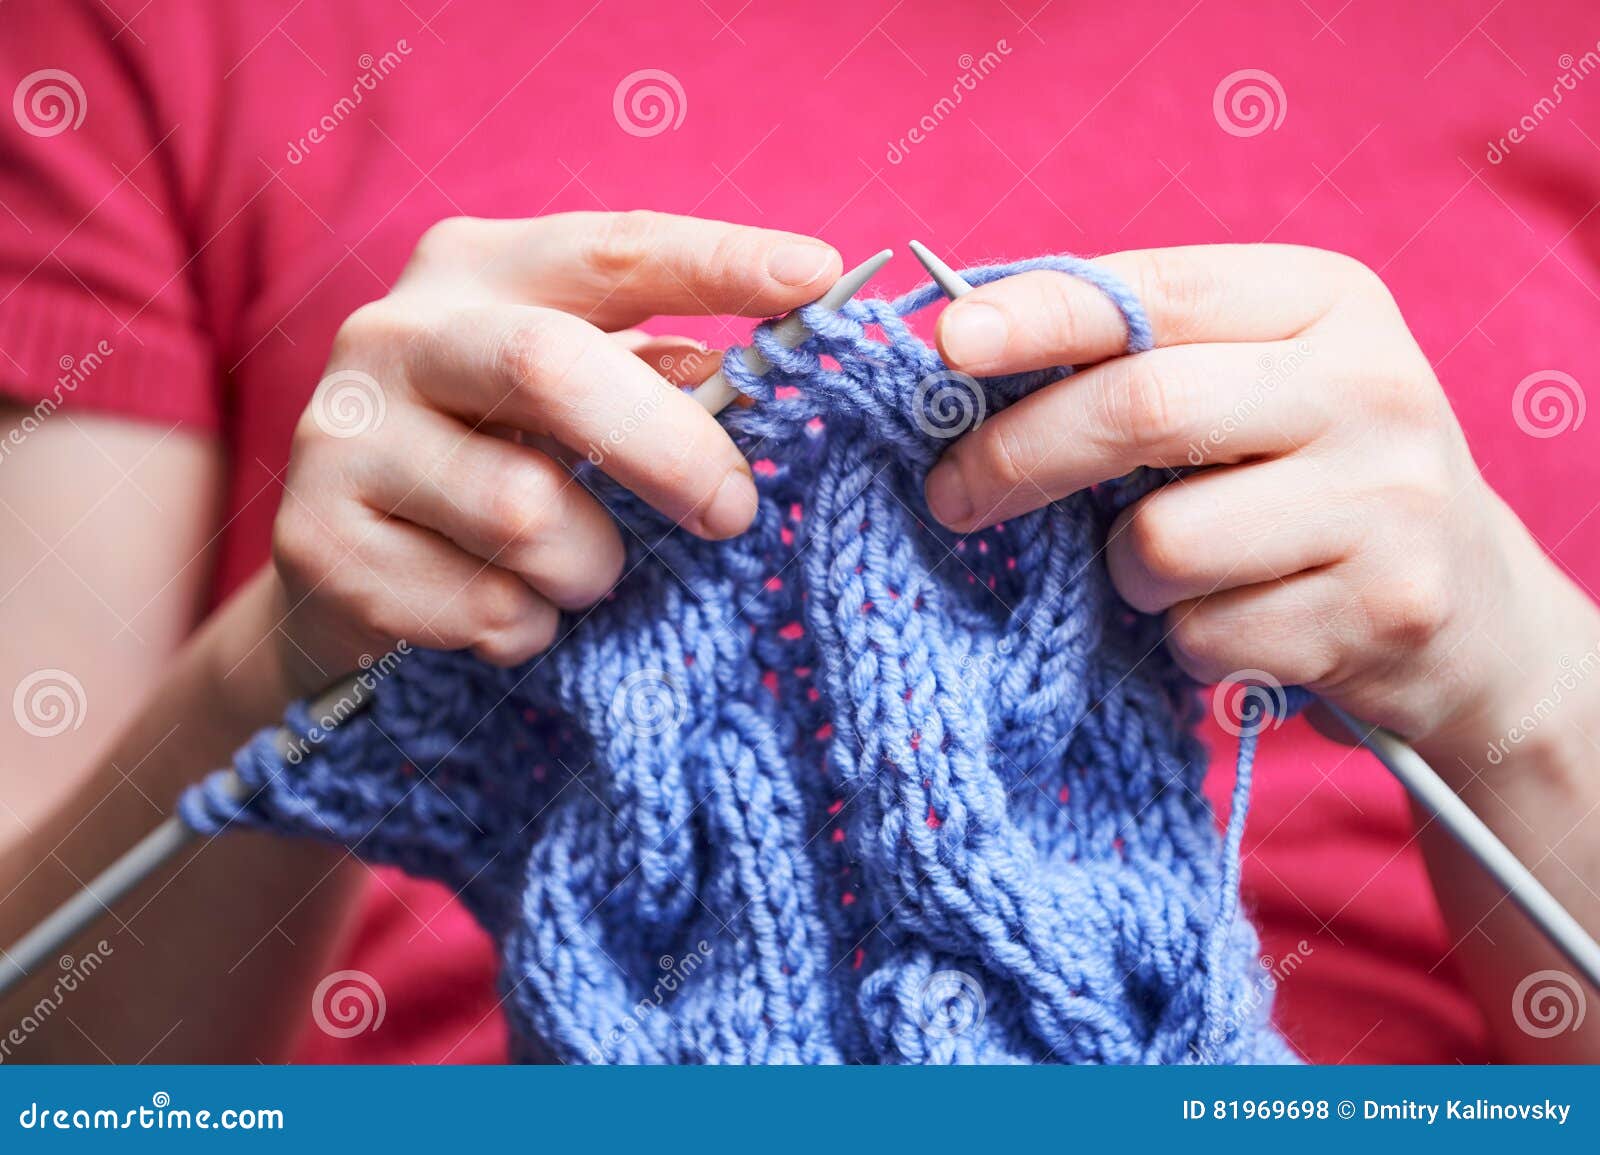 Knitting. Female Hands with Needle and Thread Stock Photo - Image of ...